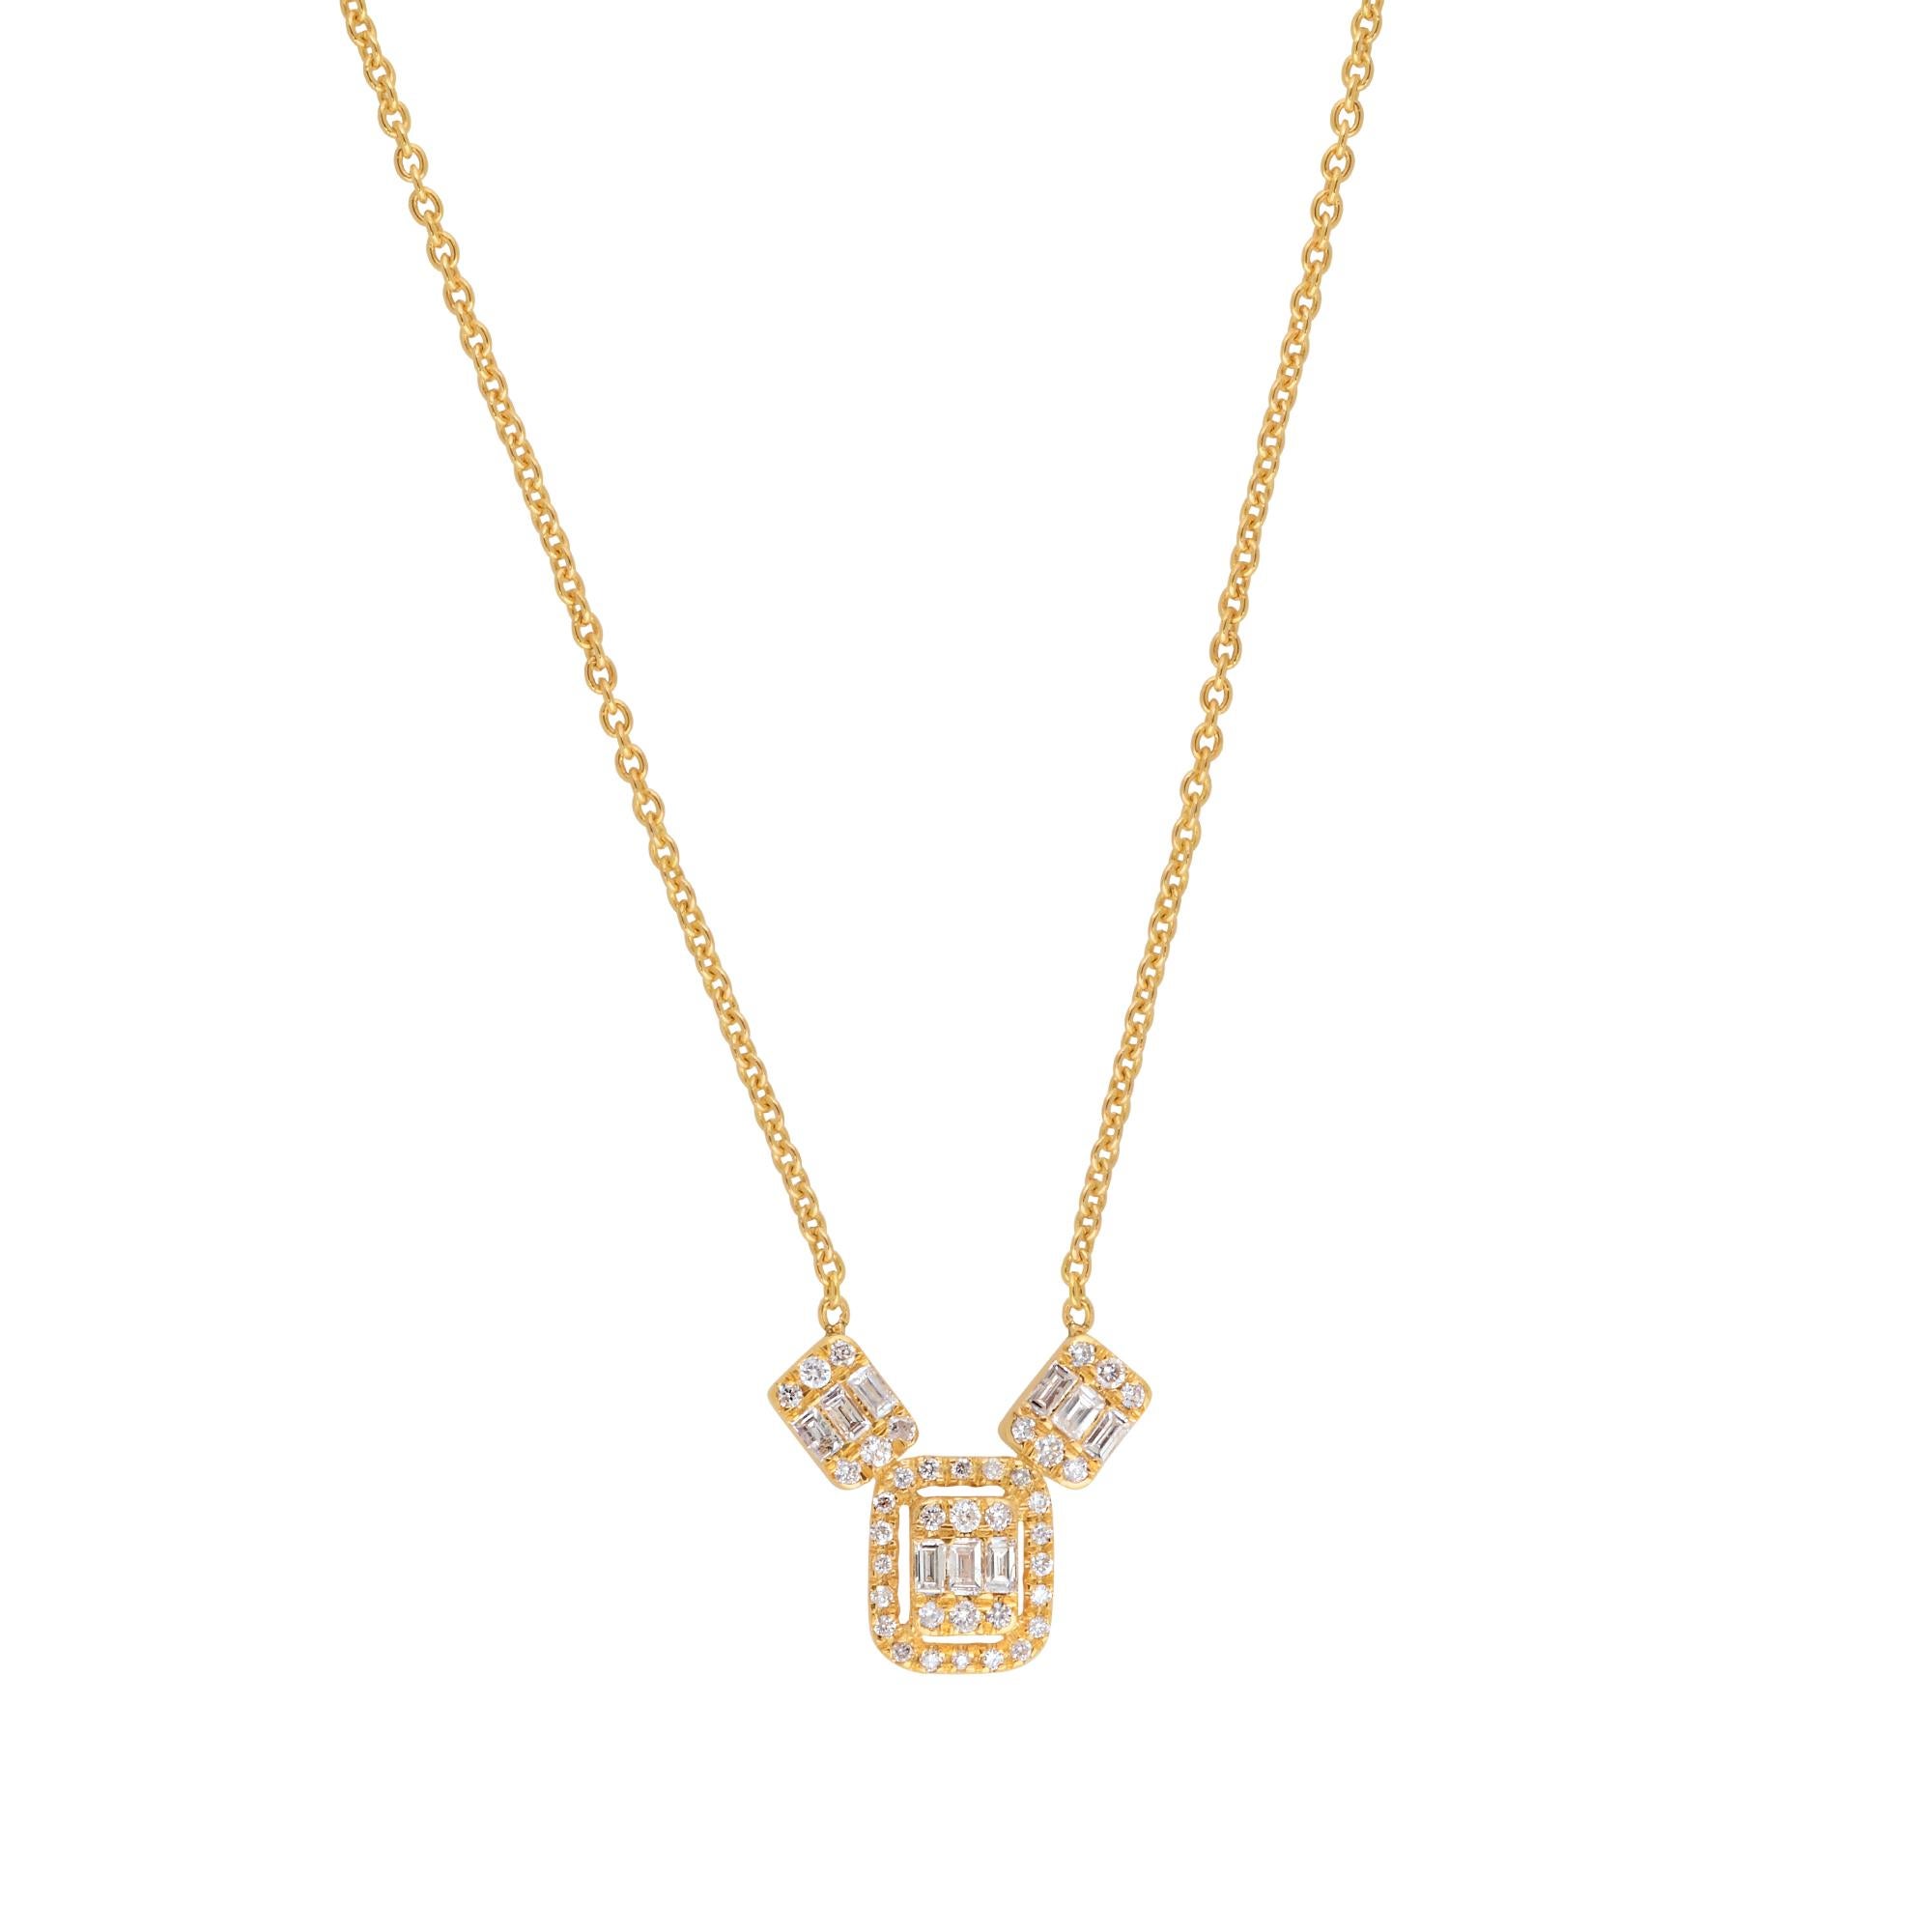 The baguette diamond pendant gracefully hangs from a solid 18k yellow gold chain, adding warmth and richness to the design. Yellow gold has long been associated with luxury and prestige, and its timeless appeal enhances the overall aesthetic of the